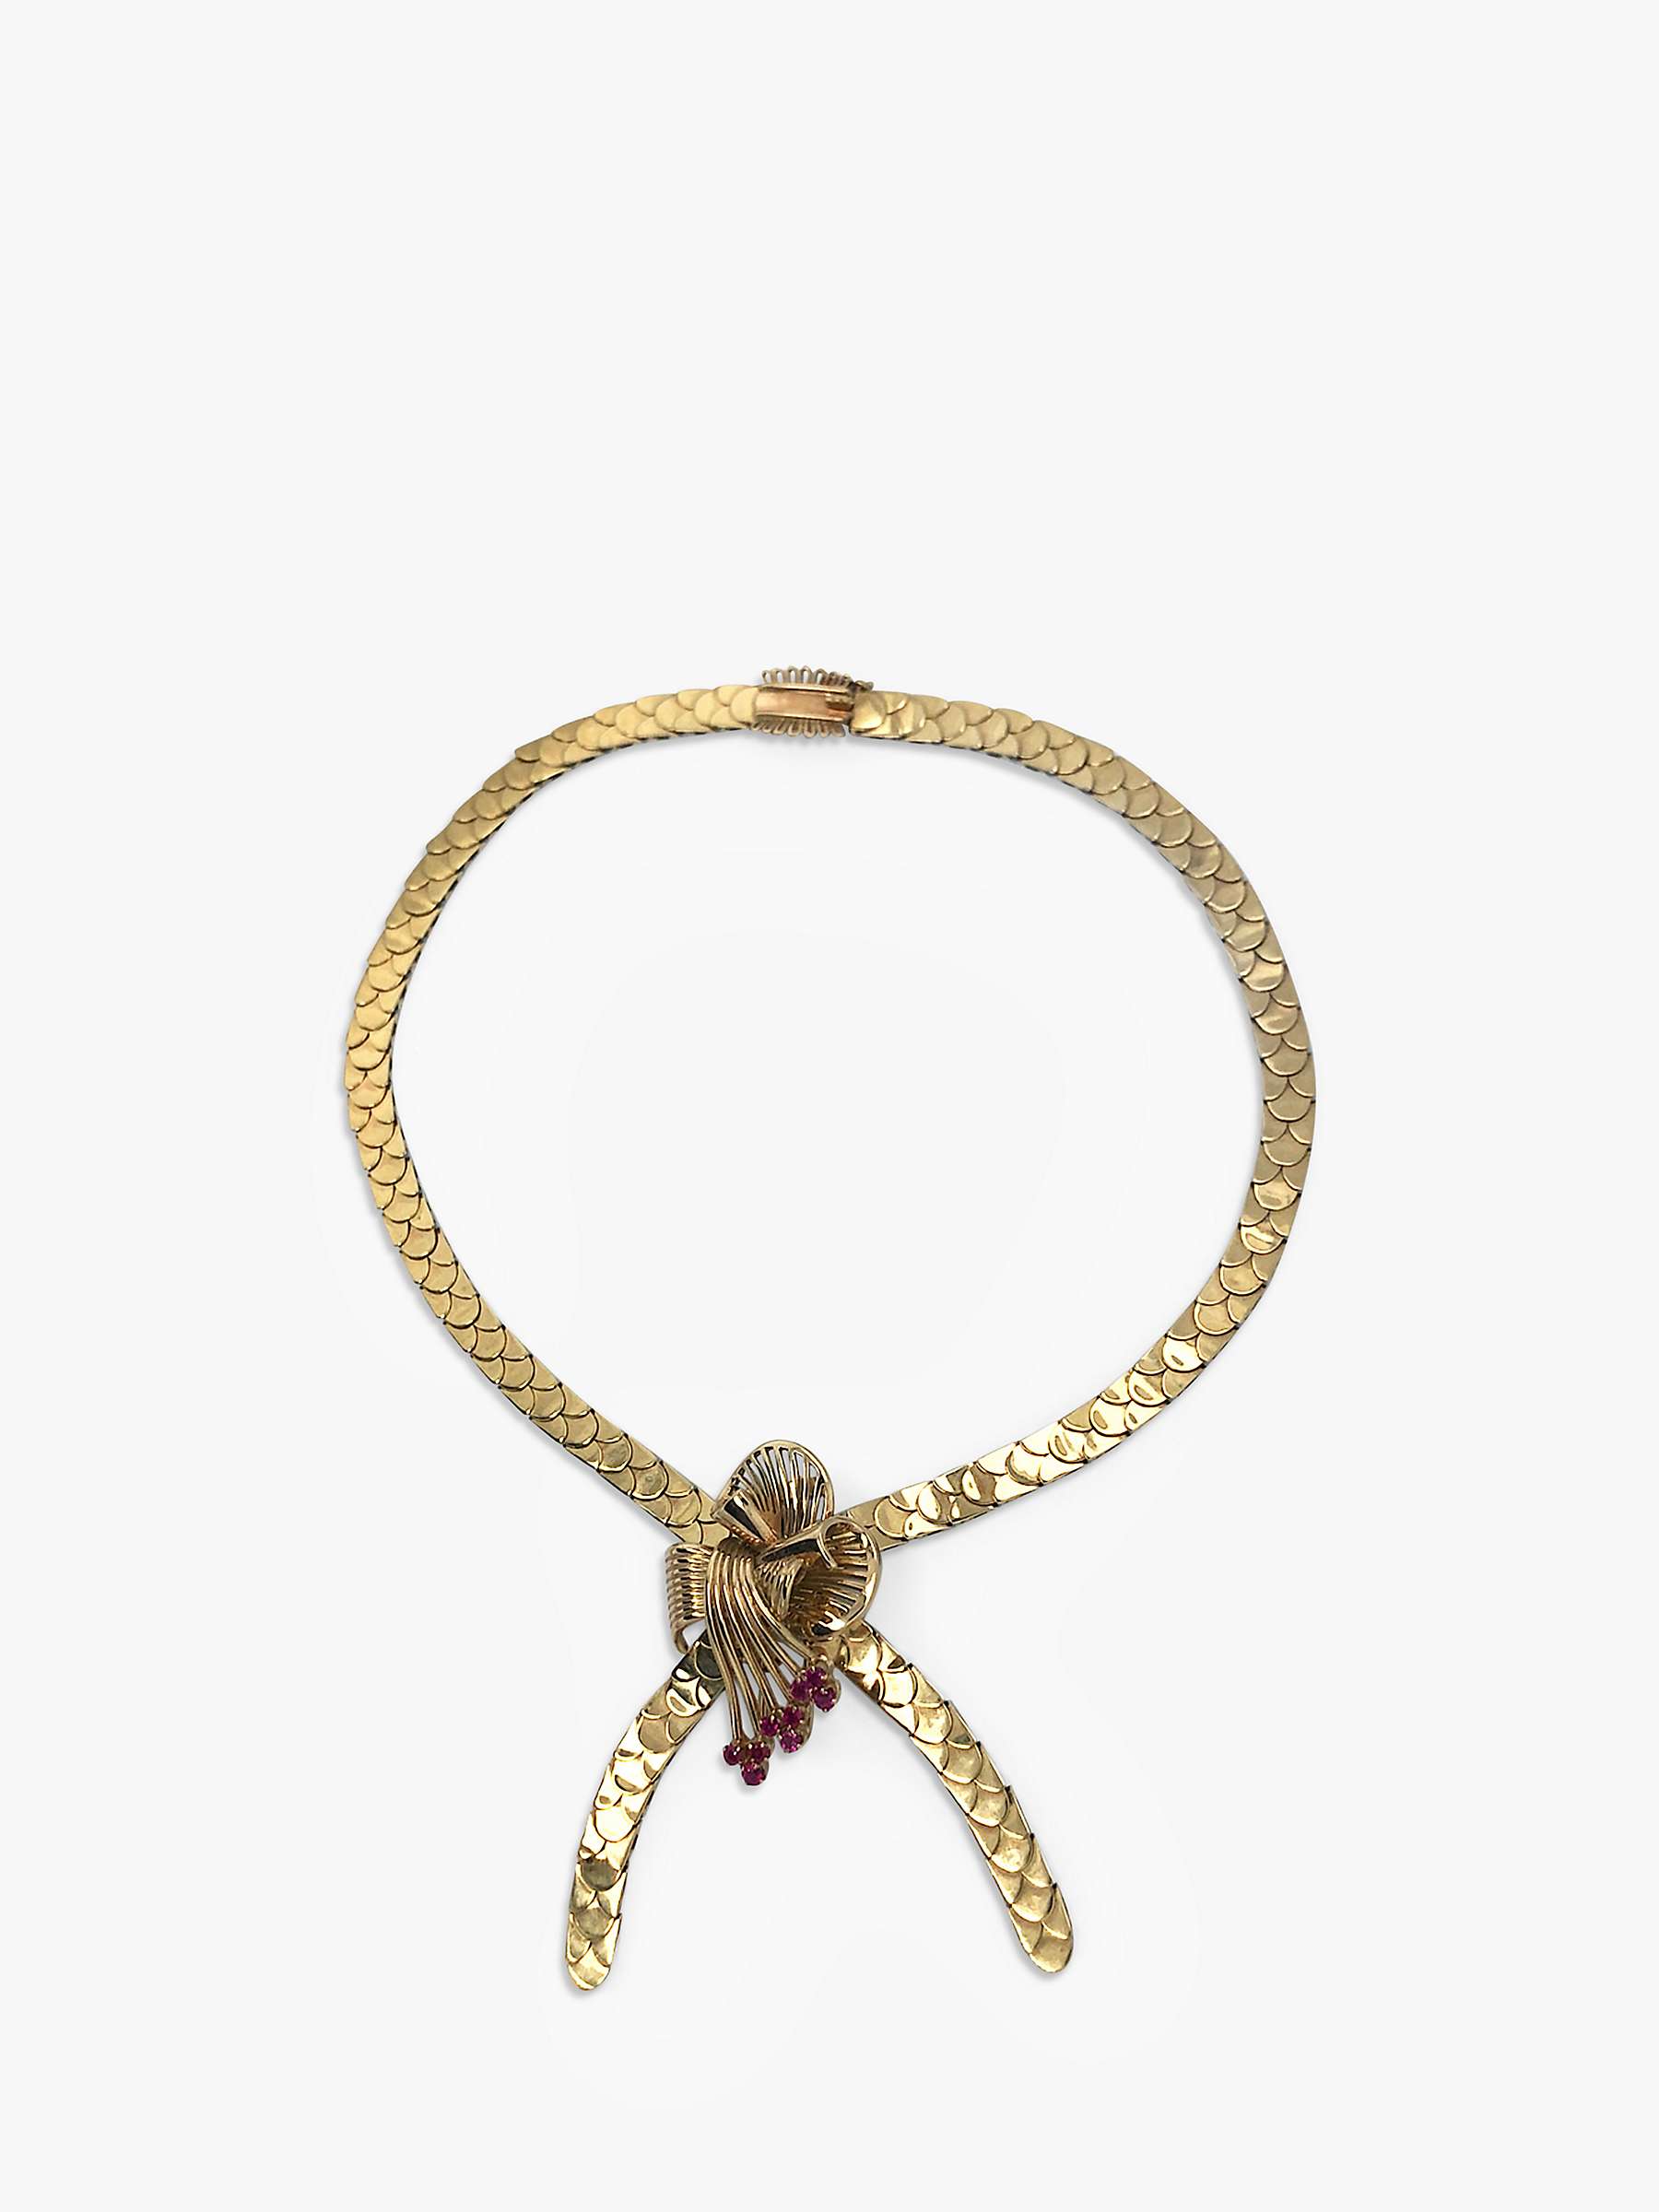 Buy Vintage Fine Jewellery Second Hand 9ct Yellow Gold Ruby Collar Necklace, Dated London 1960 Online at johnlewis.com